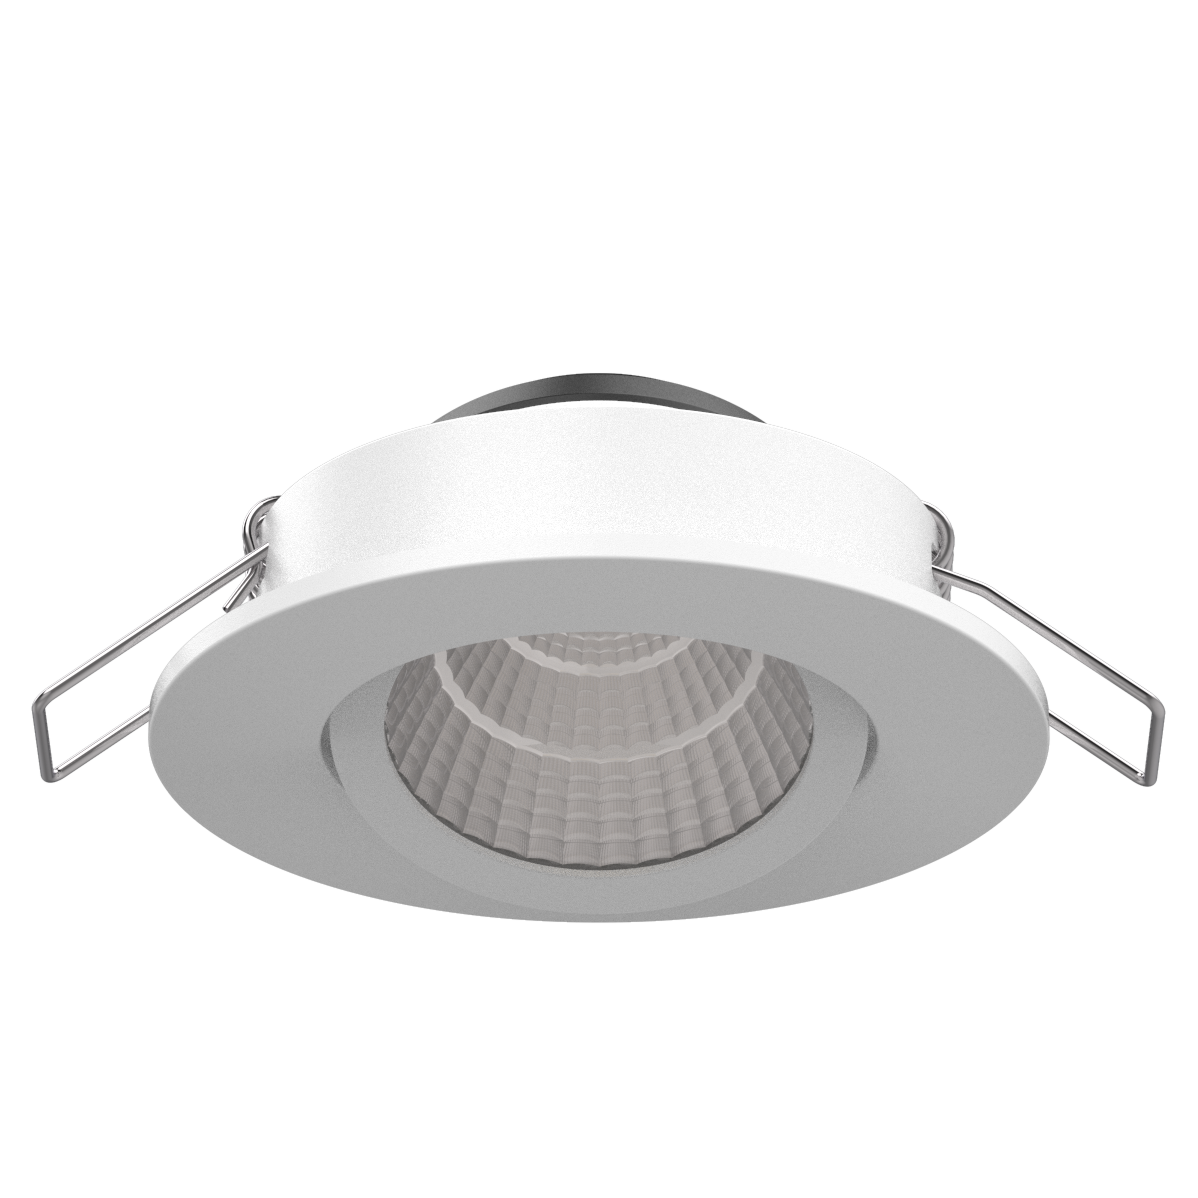 New 7W Slim Dim to warm changeable LED Downlight-Relector Version Featured Image